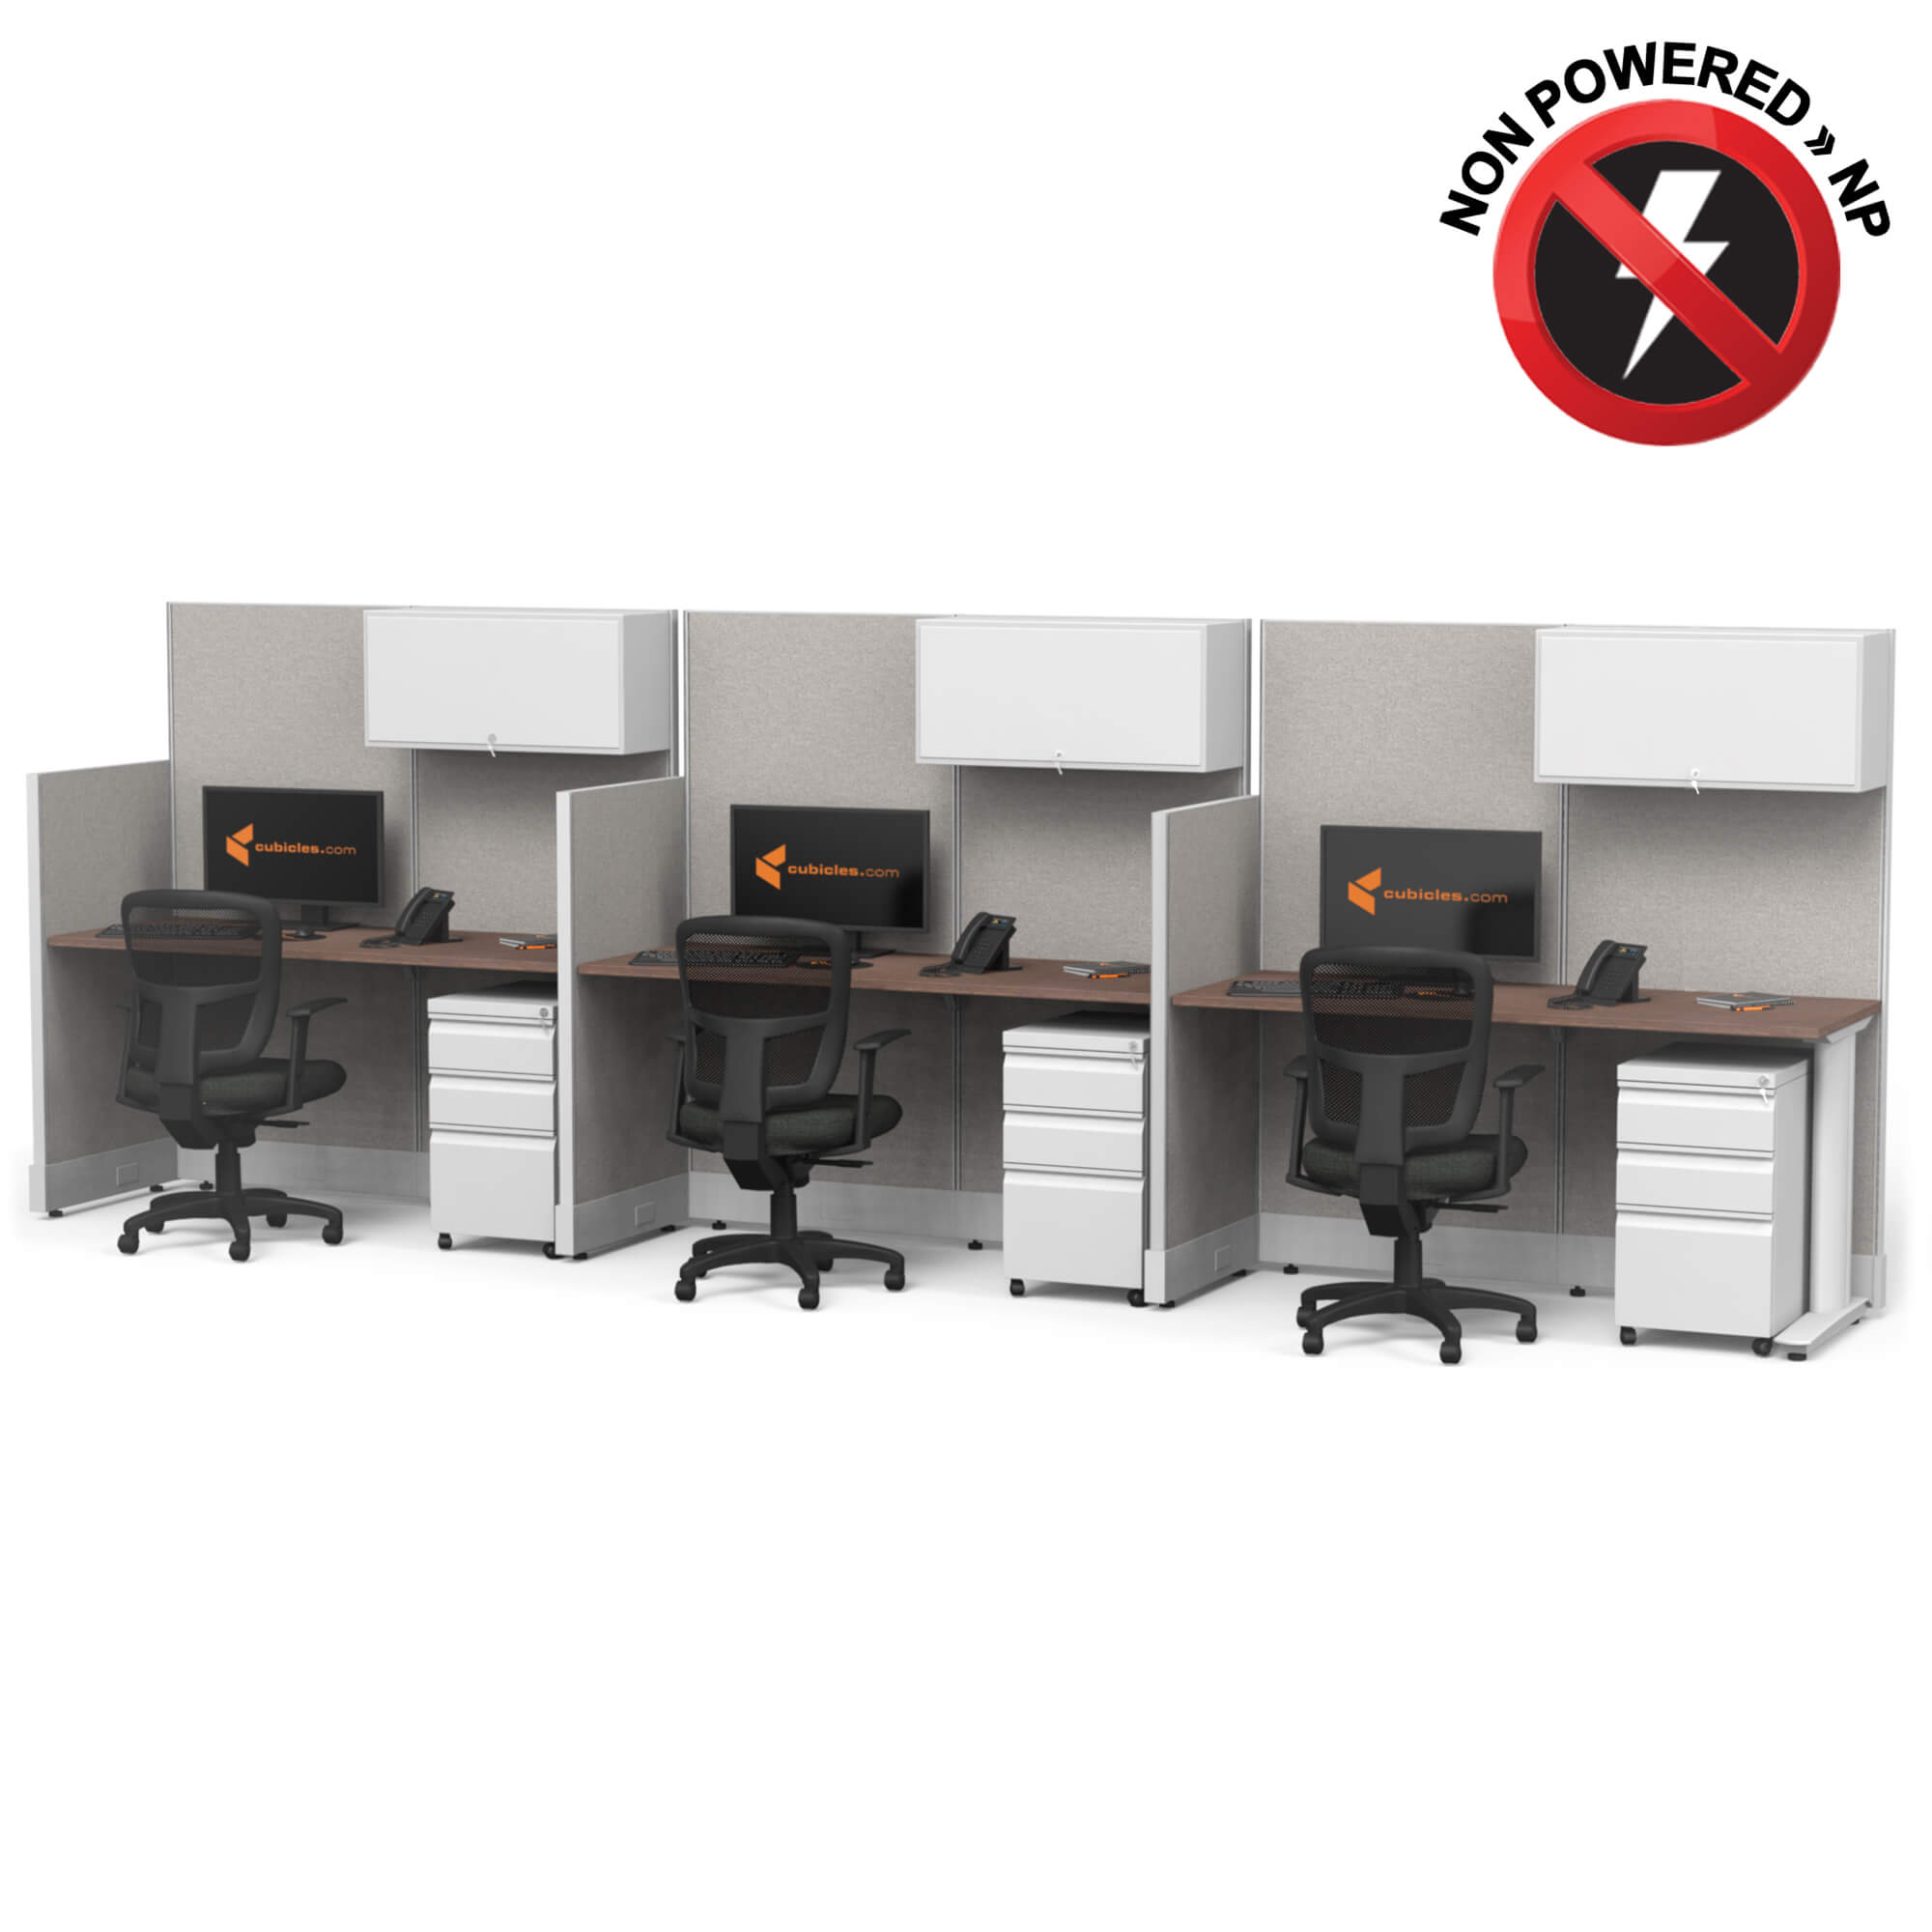 cubicle-desks-straight-workstation-3pack-inline-non-powered-with-storage-sign.jpg